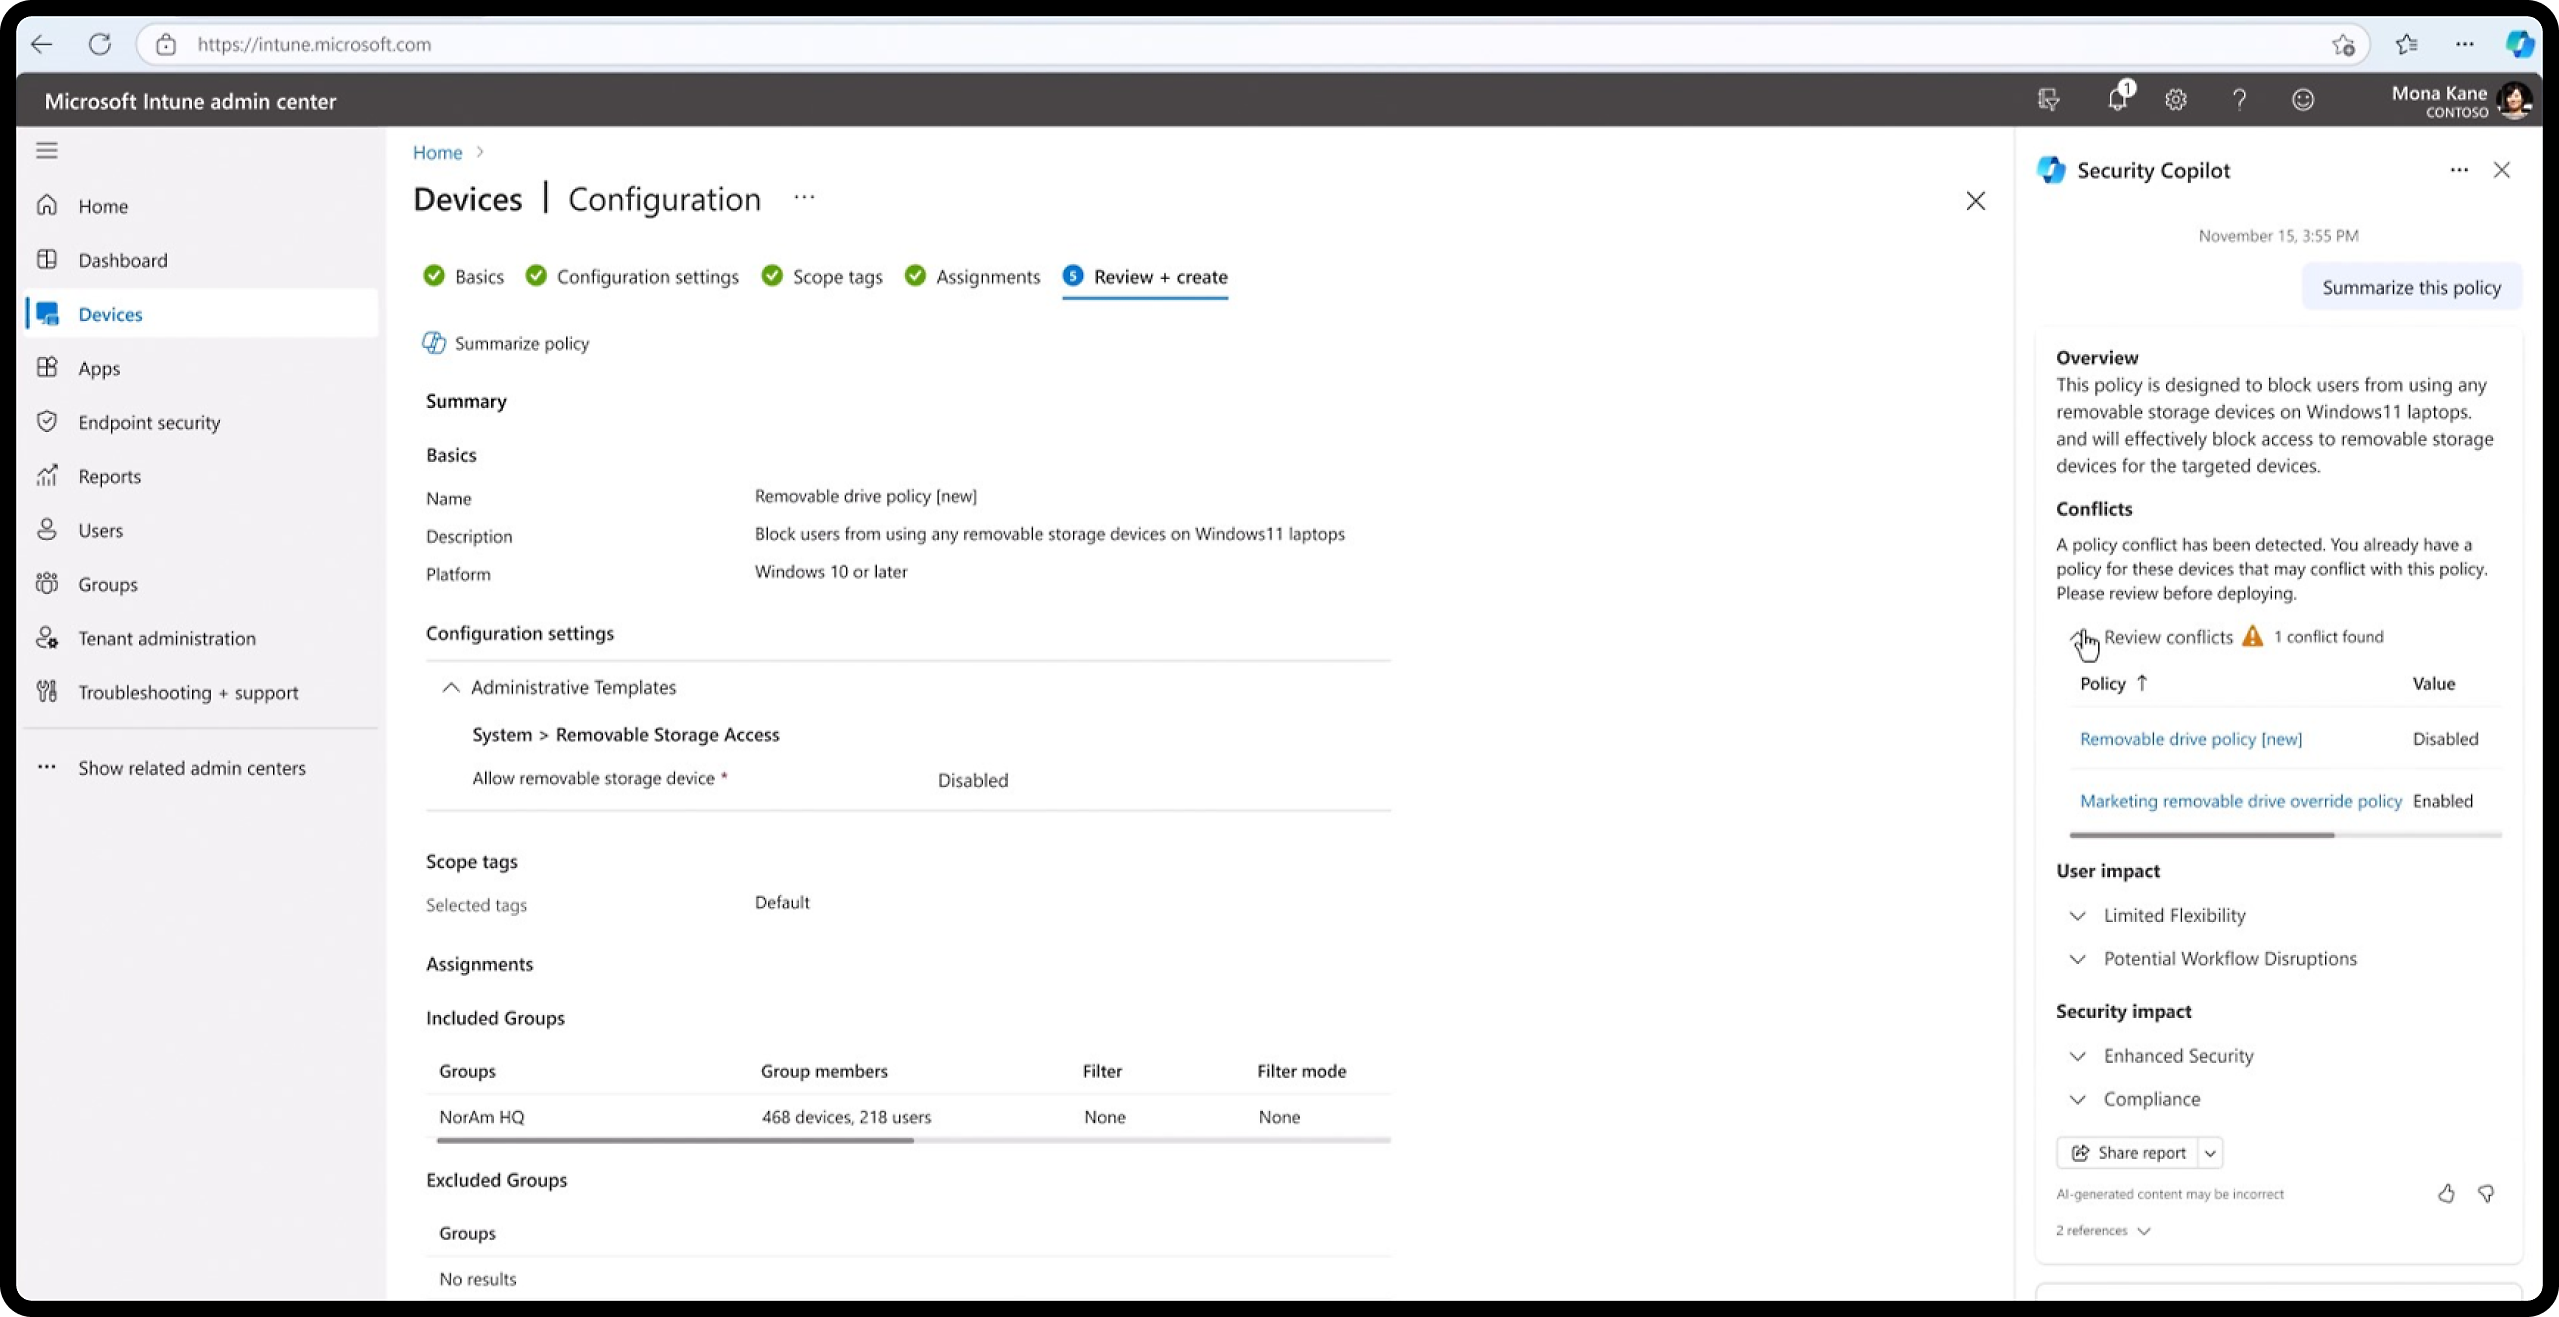 Microsoft Intune admin center: Policy on removable storage device usage for enhanced security and compliance reporting.